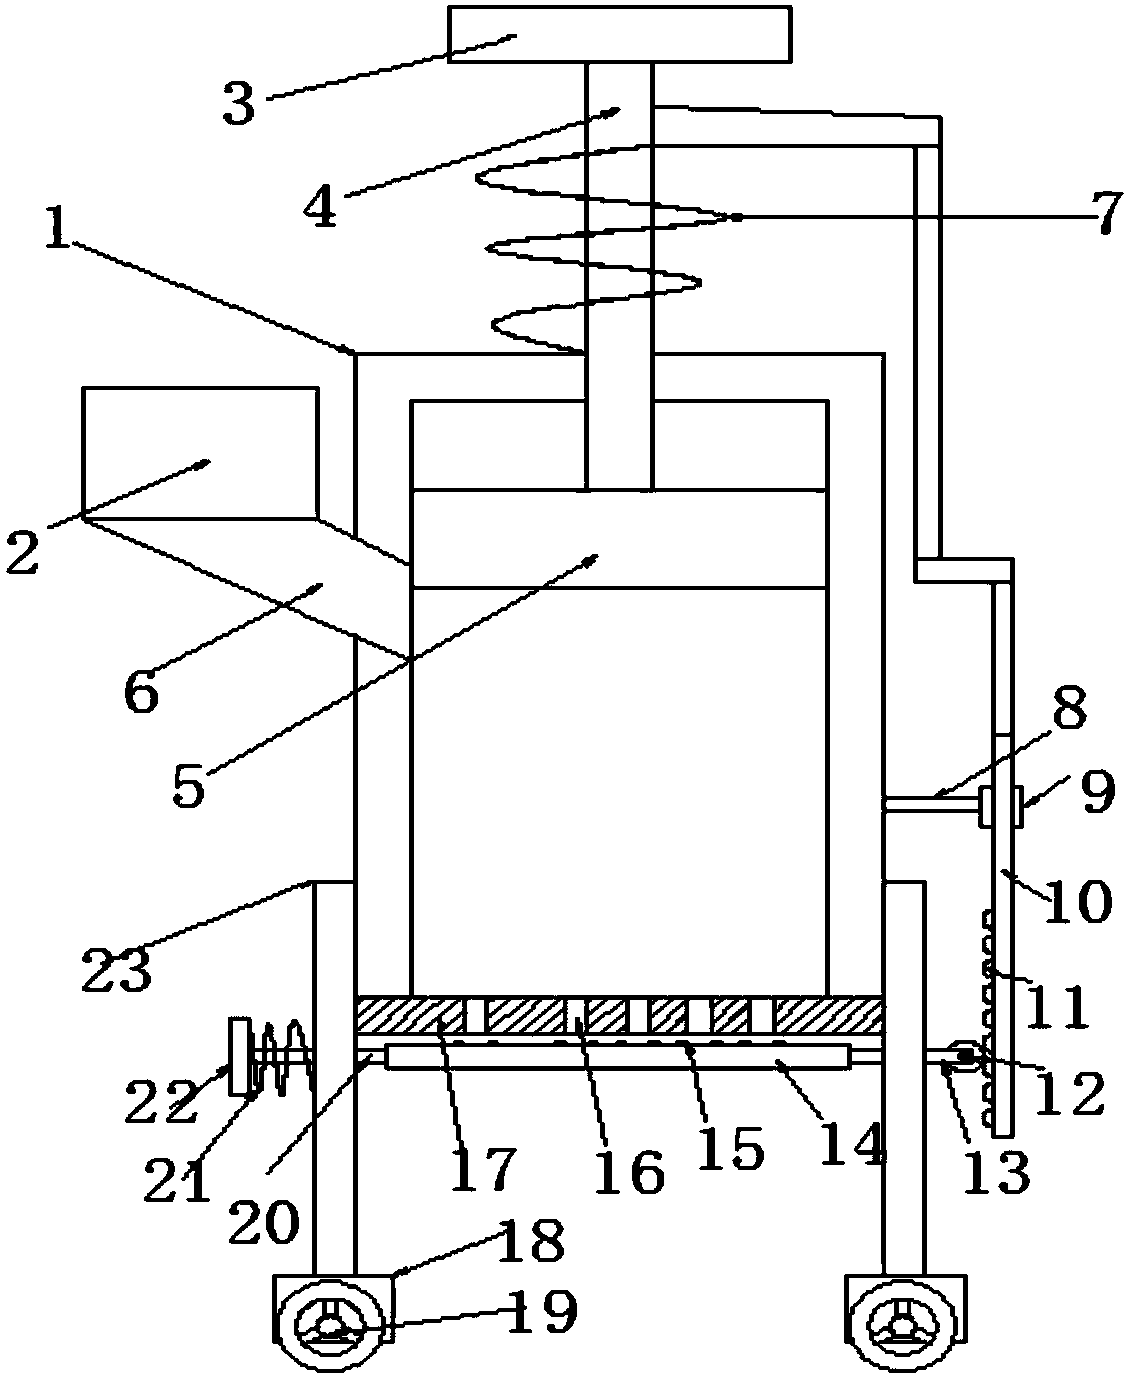 Feed particle processing device with polarized cutting function